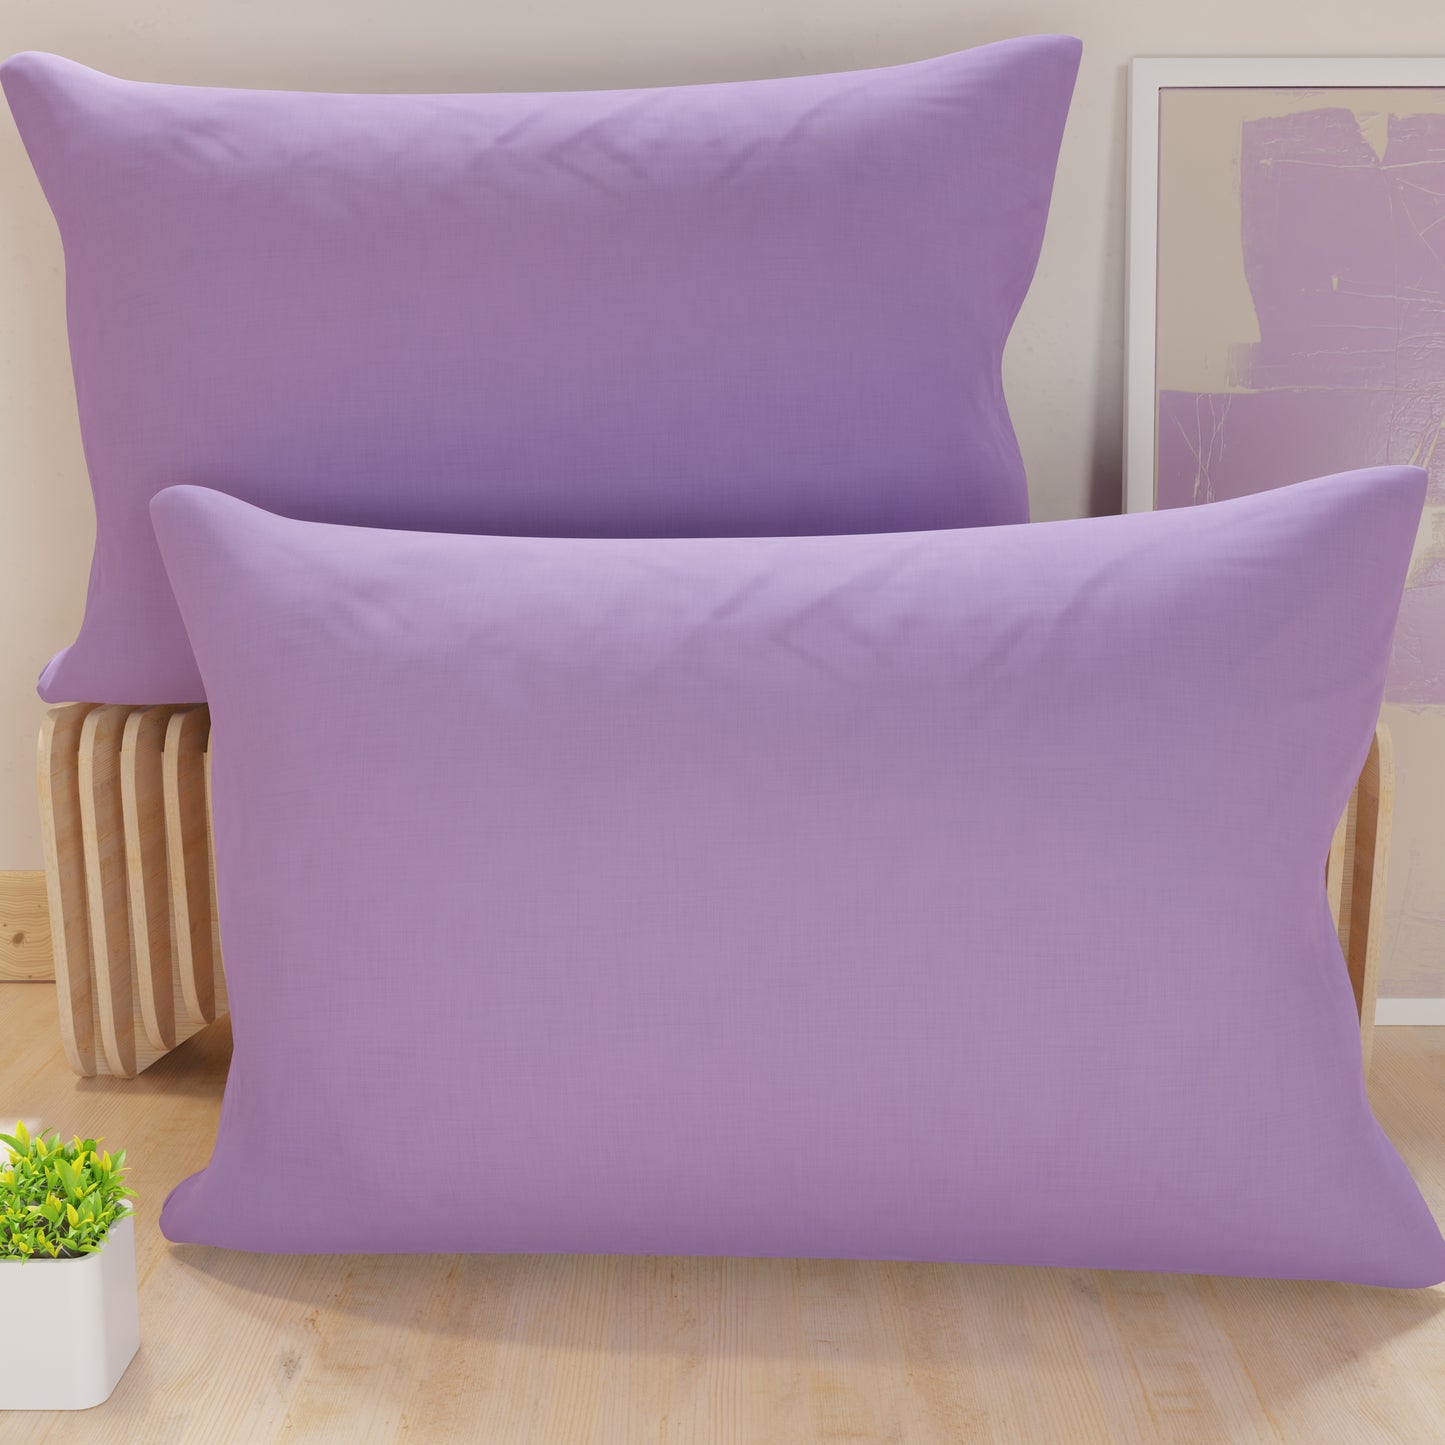 Pillowcases, Pair of Pillowcases, Pillow Covers, 100% Hypoallergenic Microfibre, Lilac